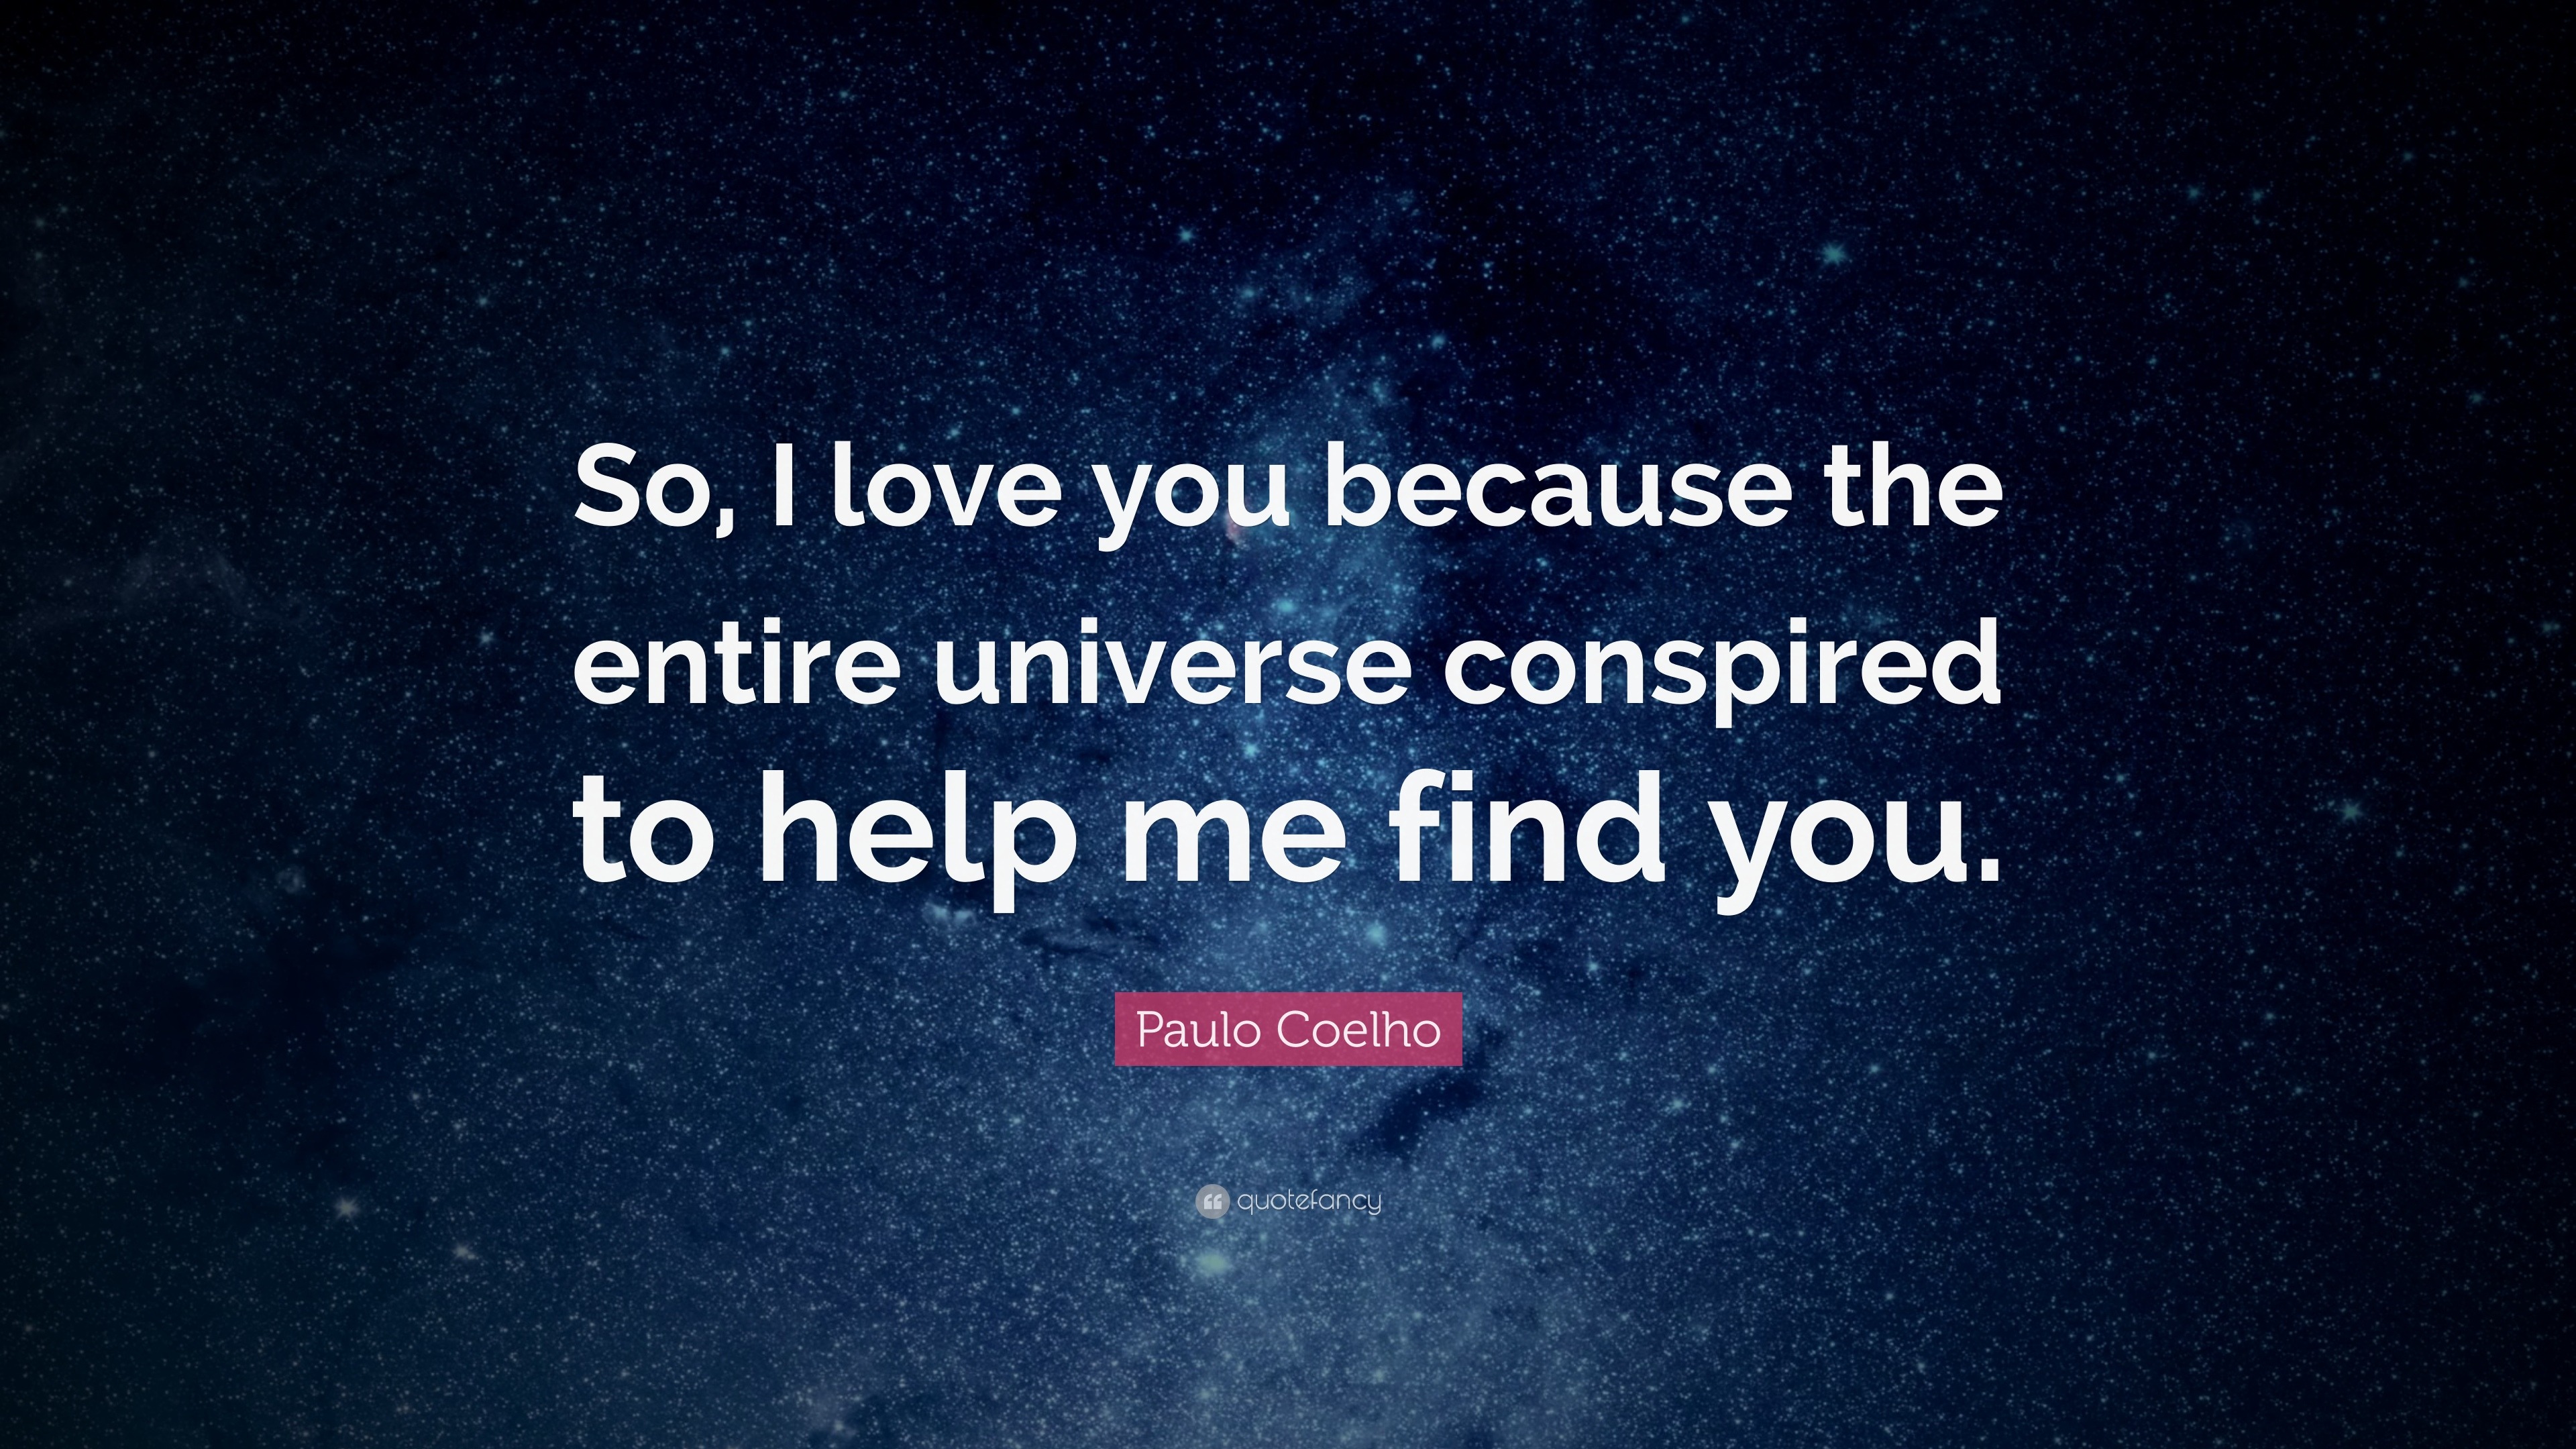 Paulo Coelho Quote: “So, I love you because the entire universe